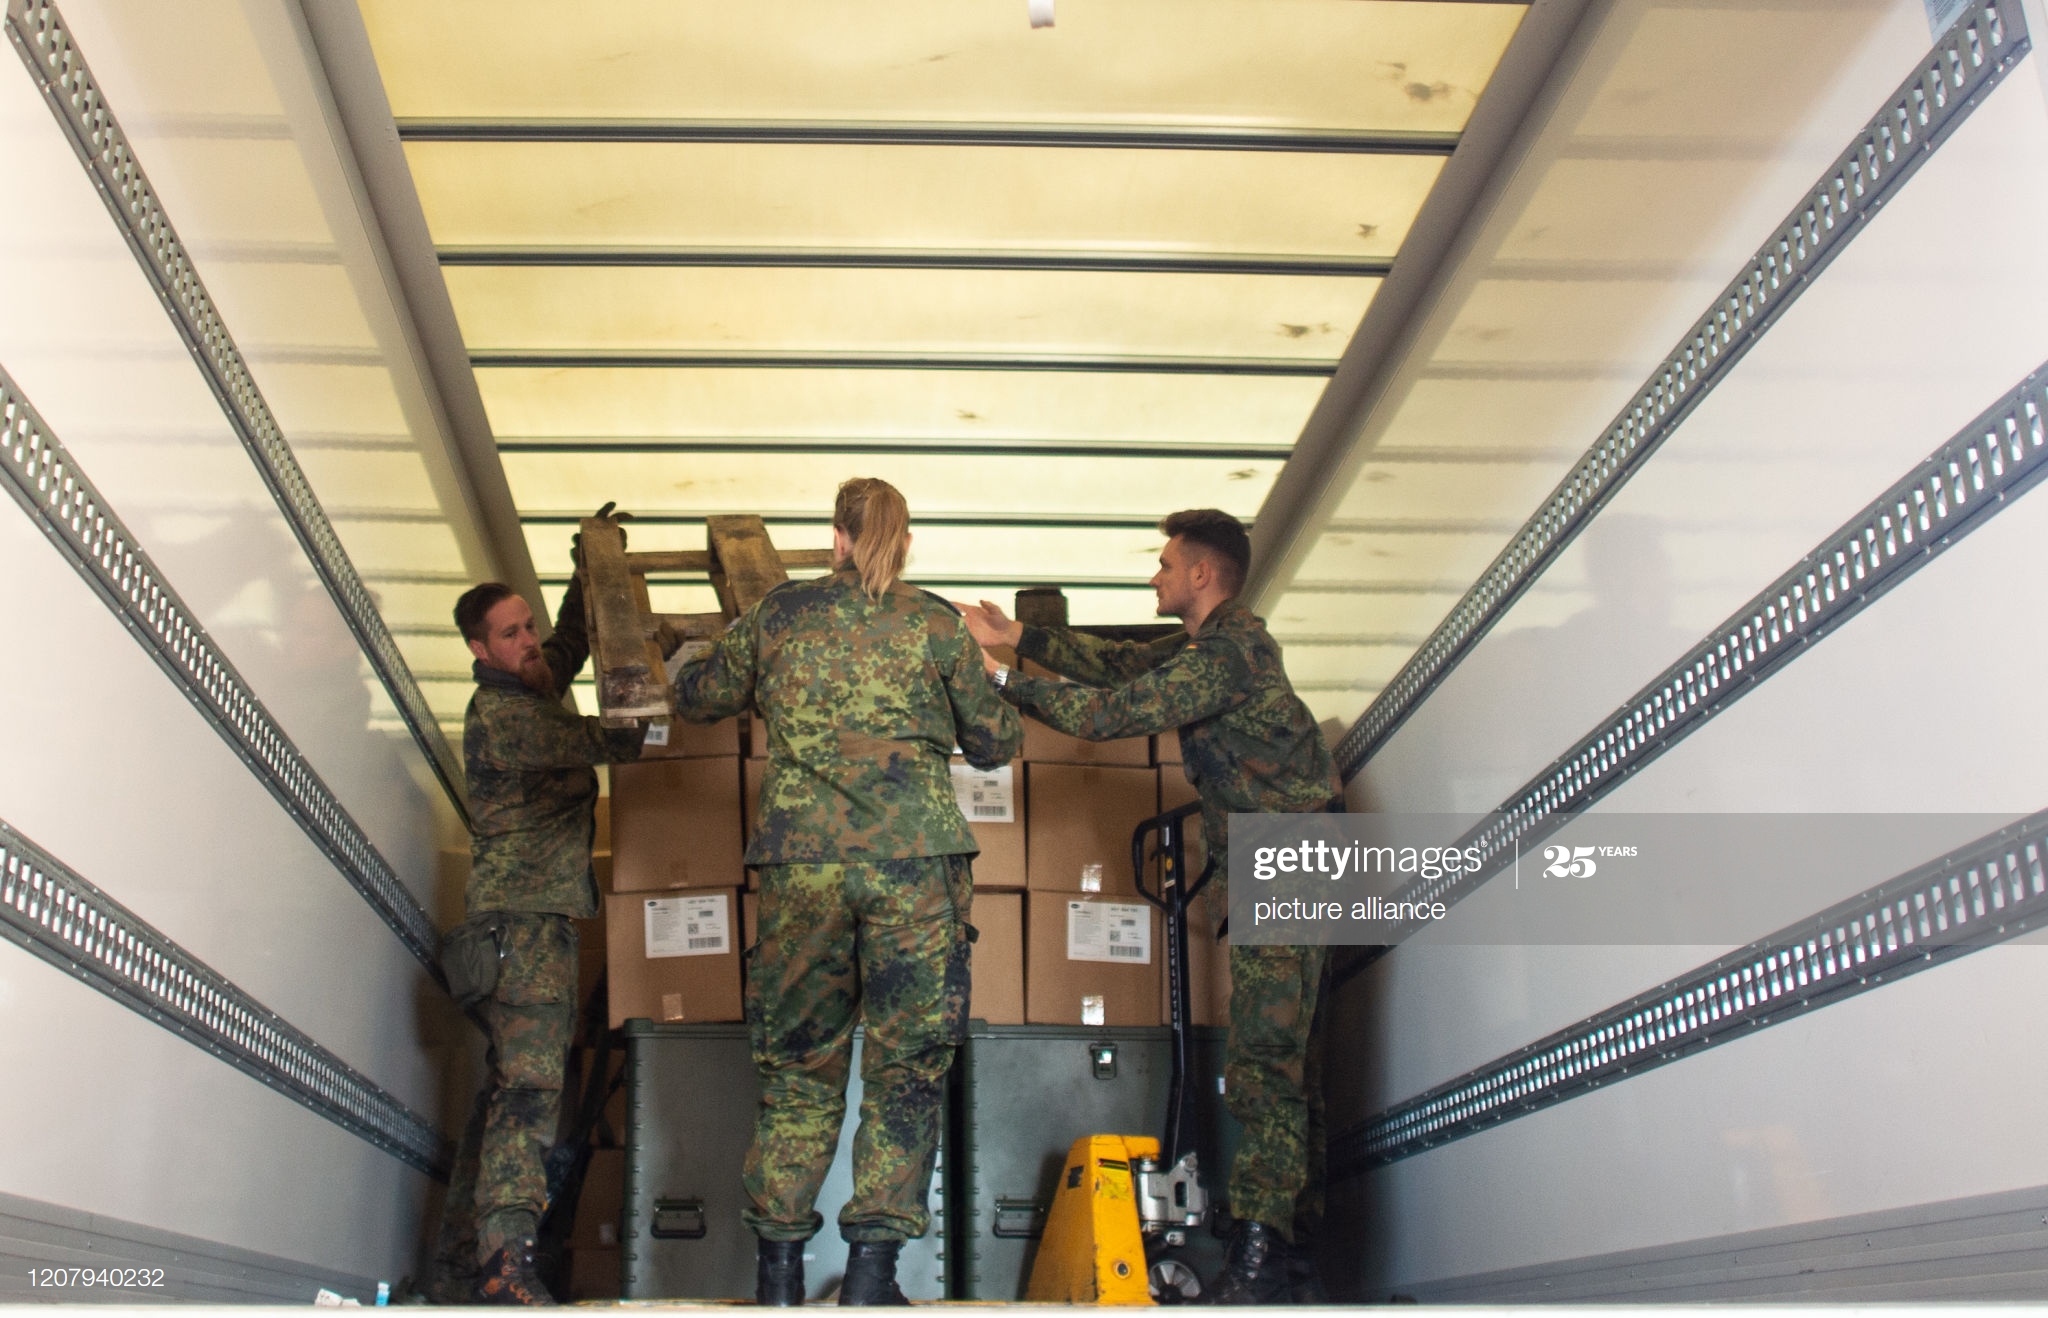 march-2020-north-rhinewestphalia-erkelenz-soldiers-are-loading-boxes-picture-id1207940232